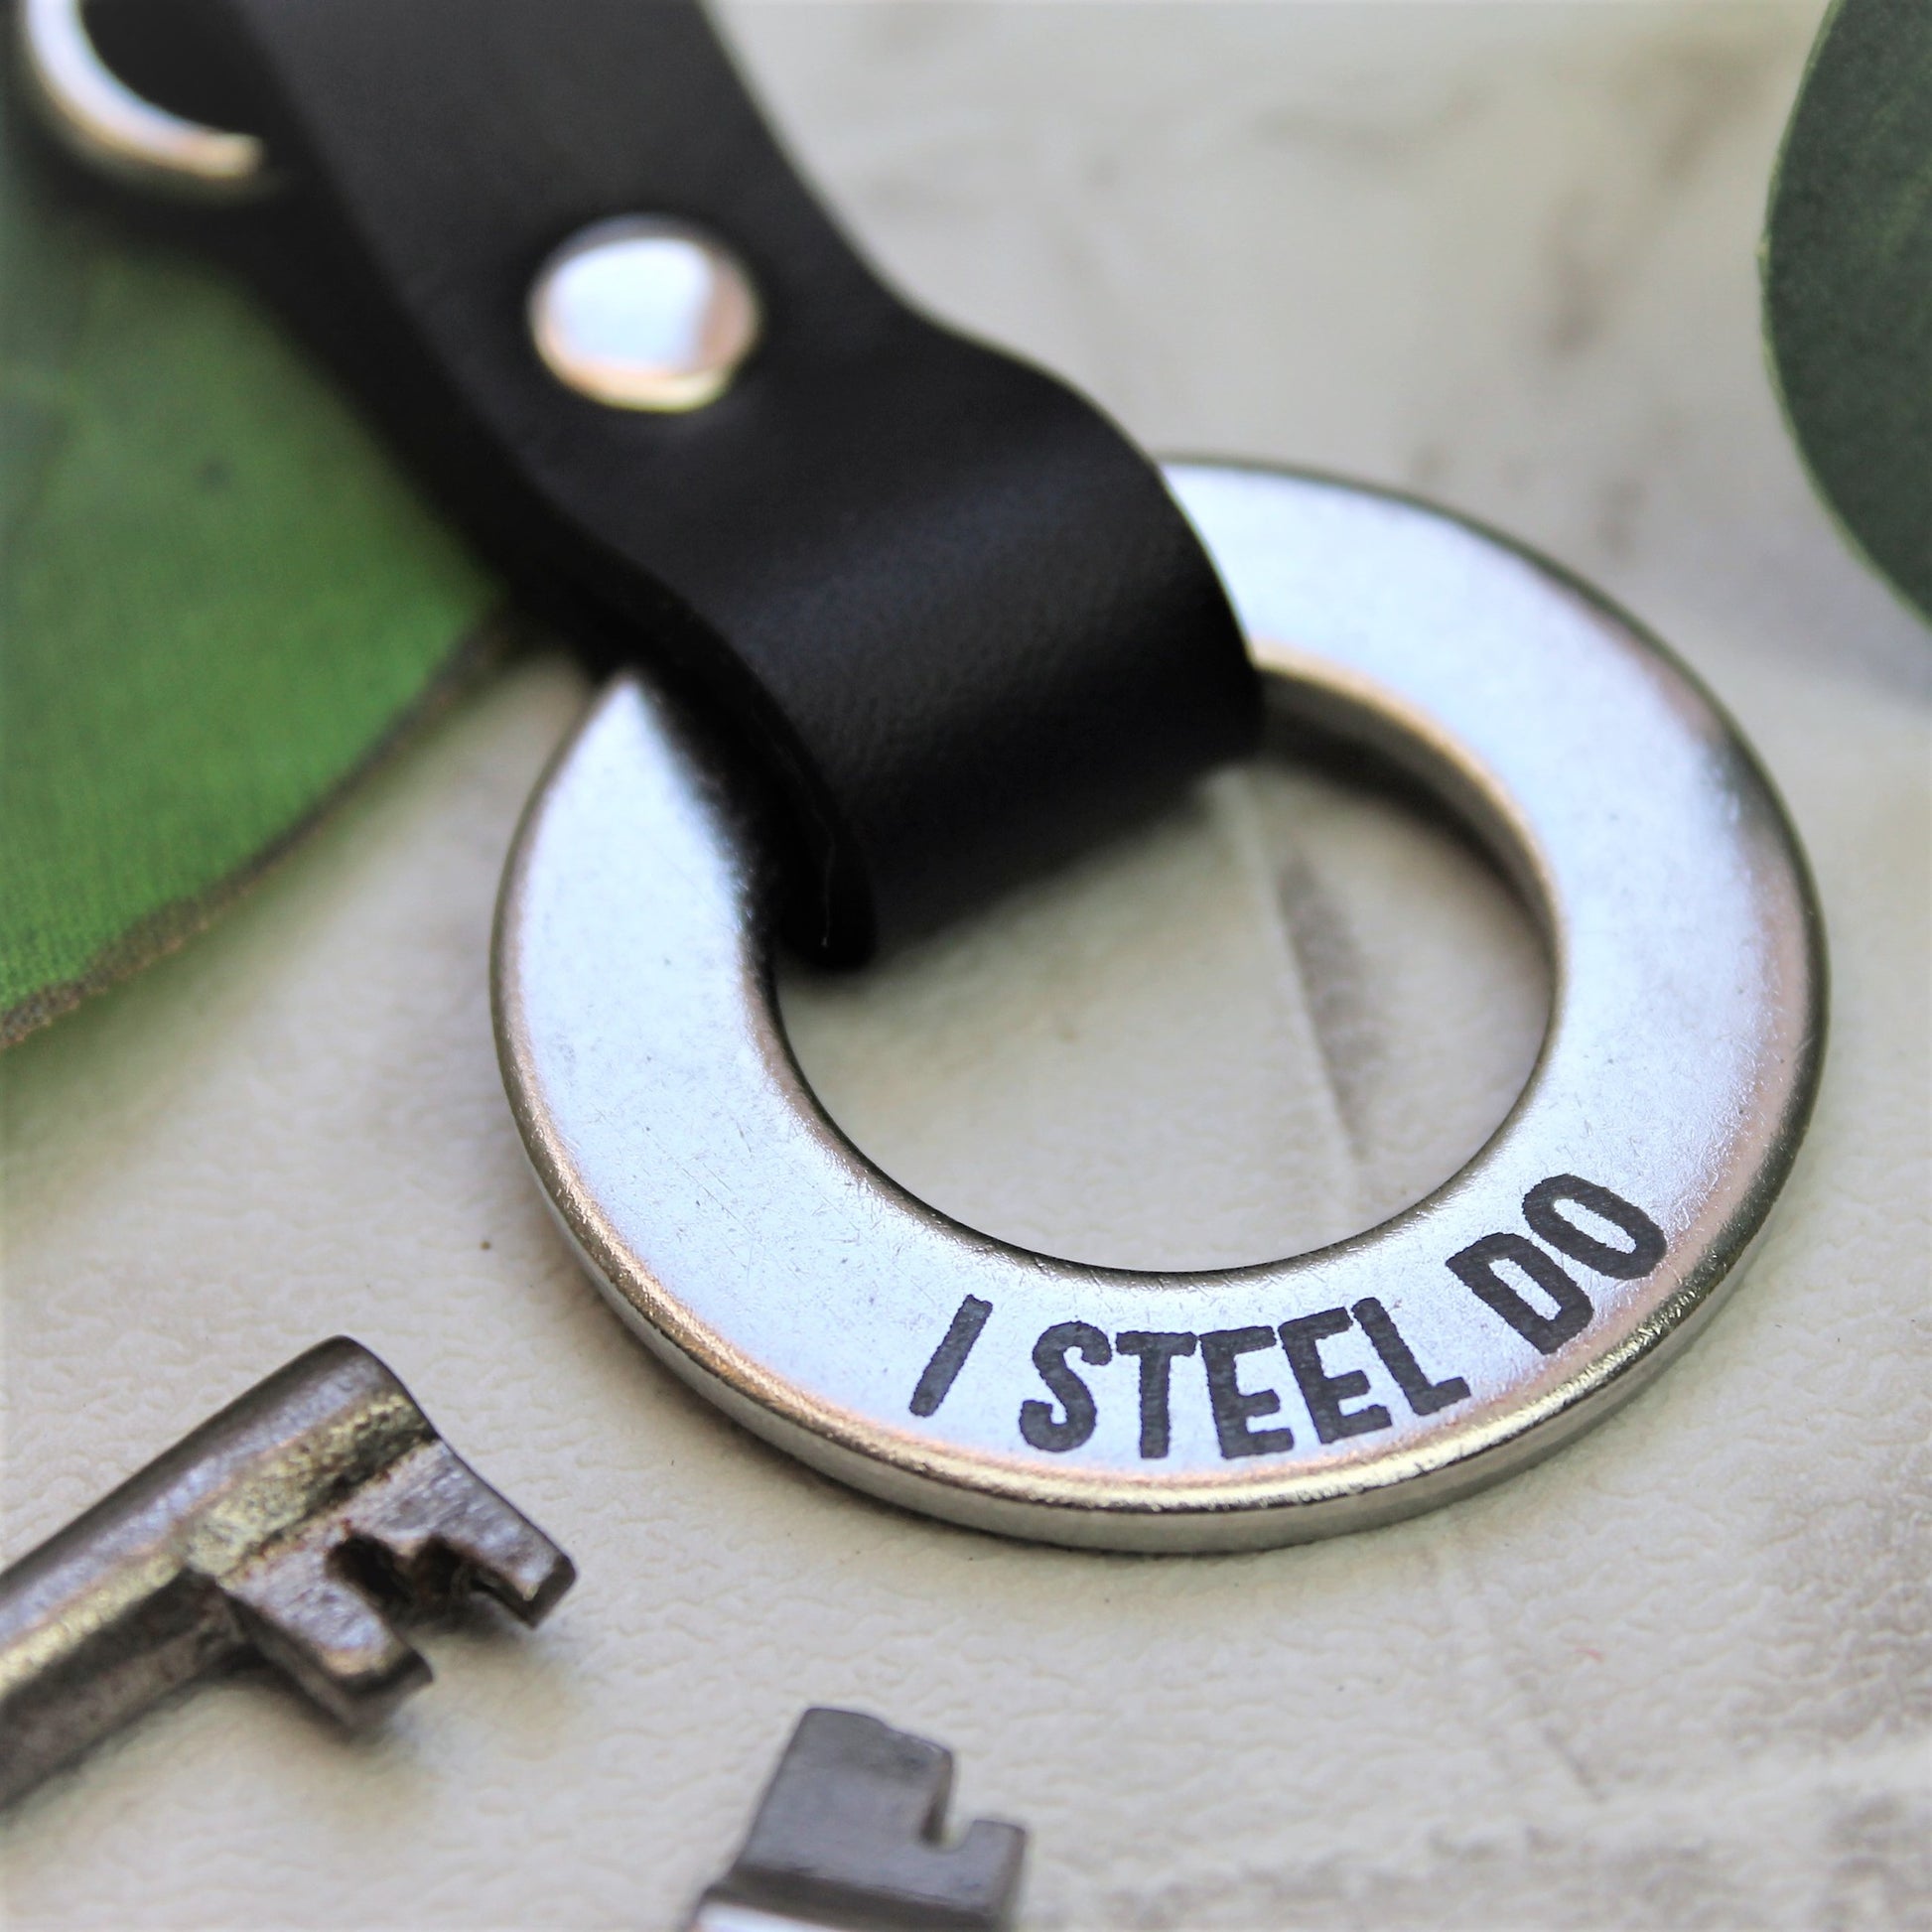 Metal stamped silver steel anniversary keyring with black leather attachments